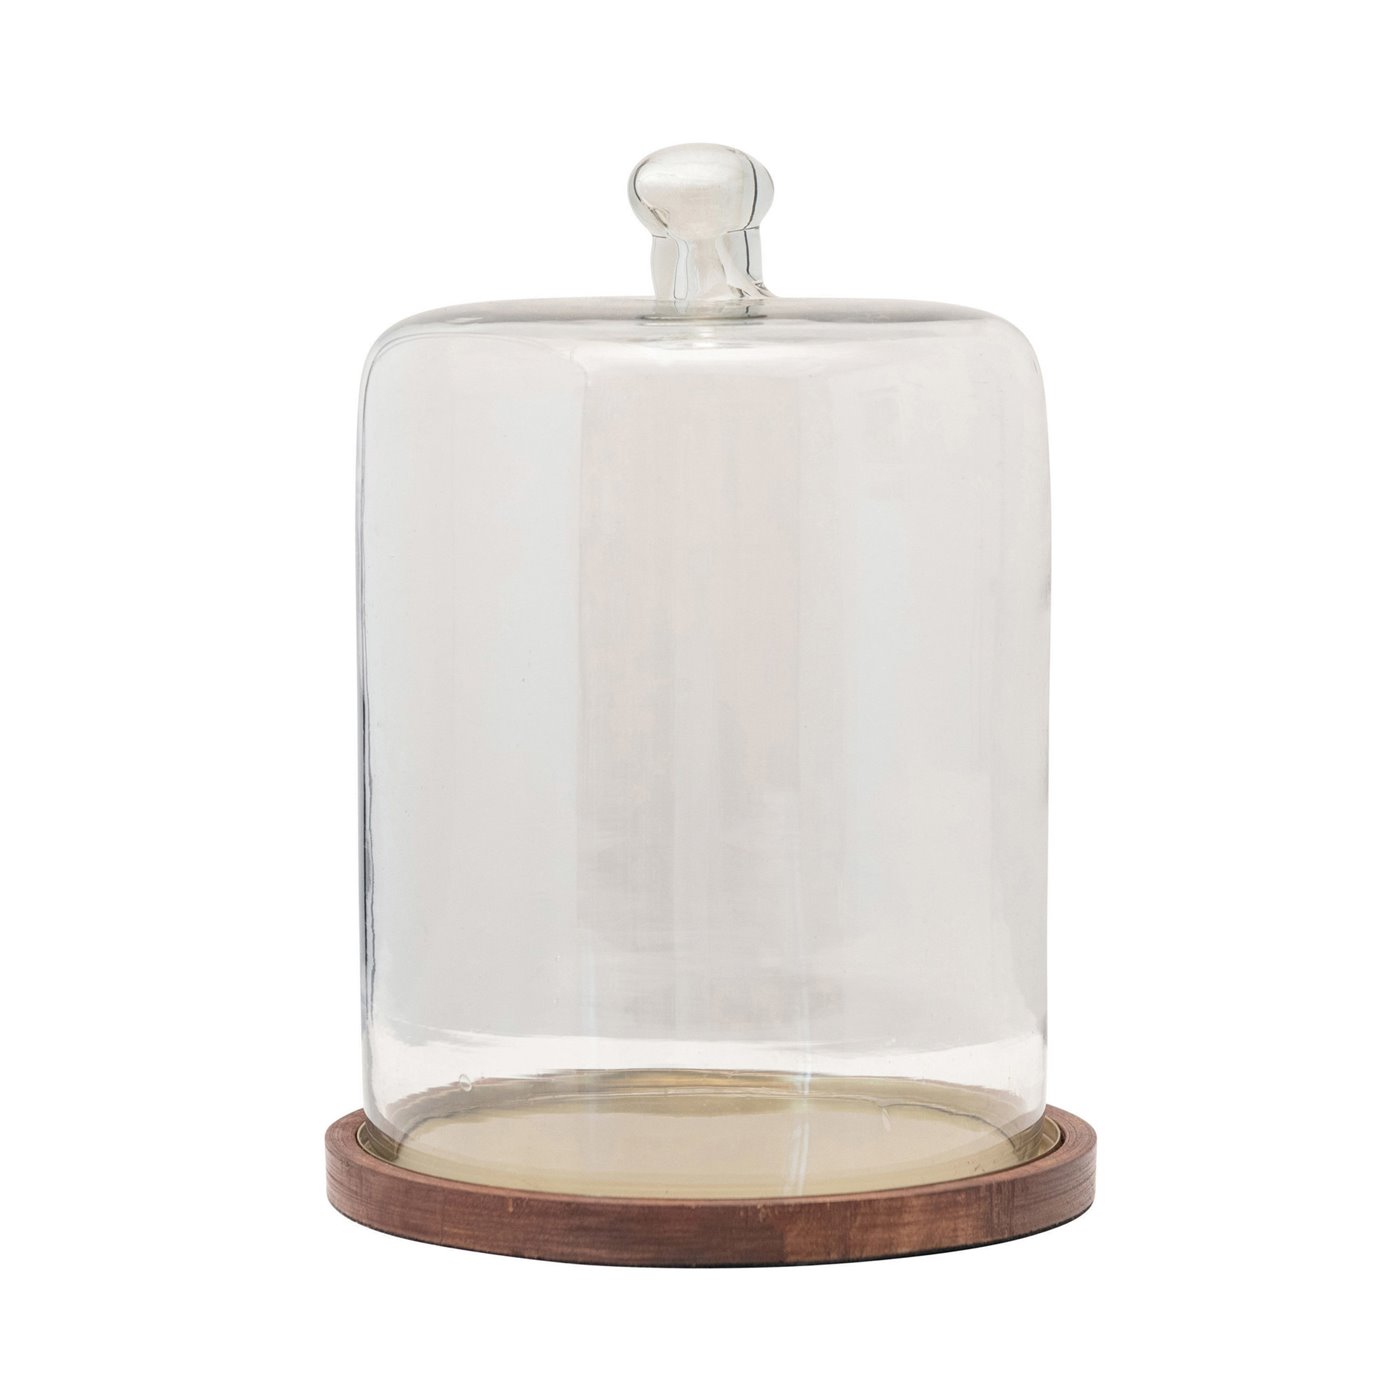 Glass Cloche with Wood & Metal Base, Set of 2